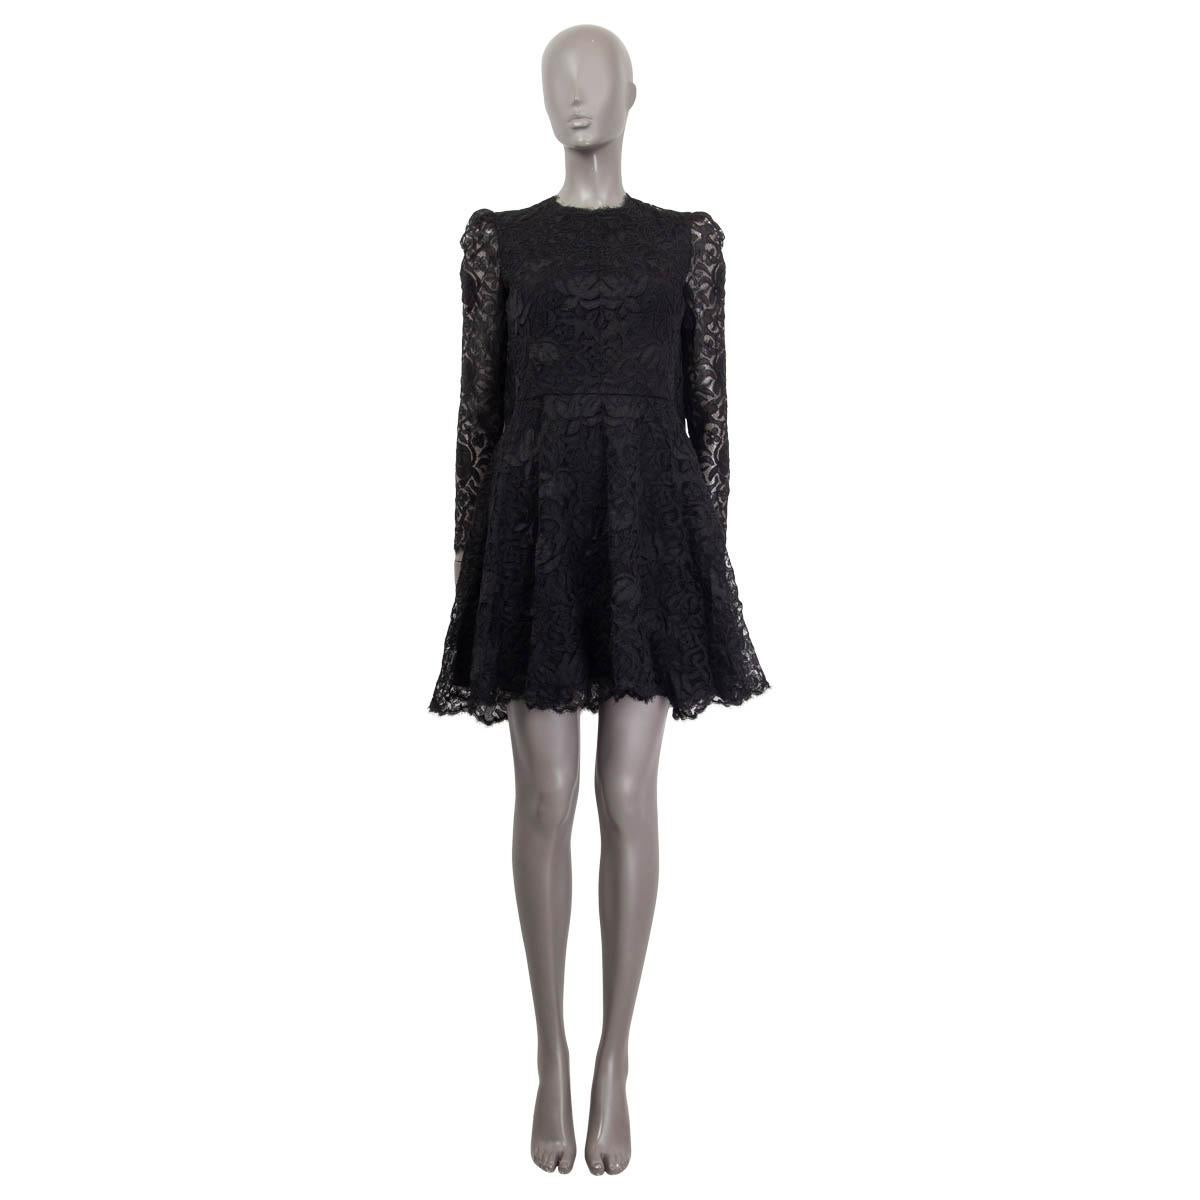 100% authentic Alexander McQueen a-line lace dress in black polyamide (36%), cotton (34%), viscose (20%) and polyester (10%). Features long semi-sheer sleeves and zipped cuffs. Opens with two concealed zippers and a hook on the back. Lined in black